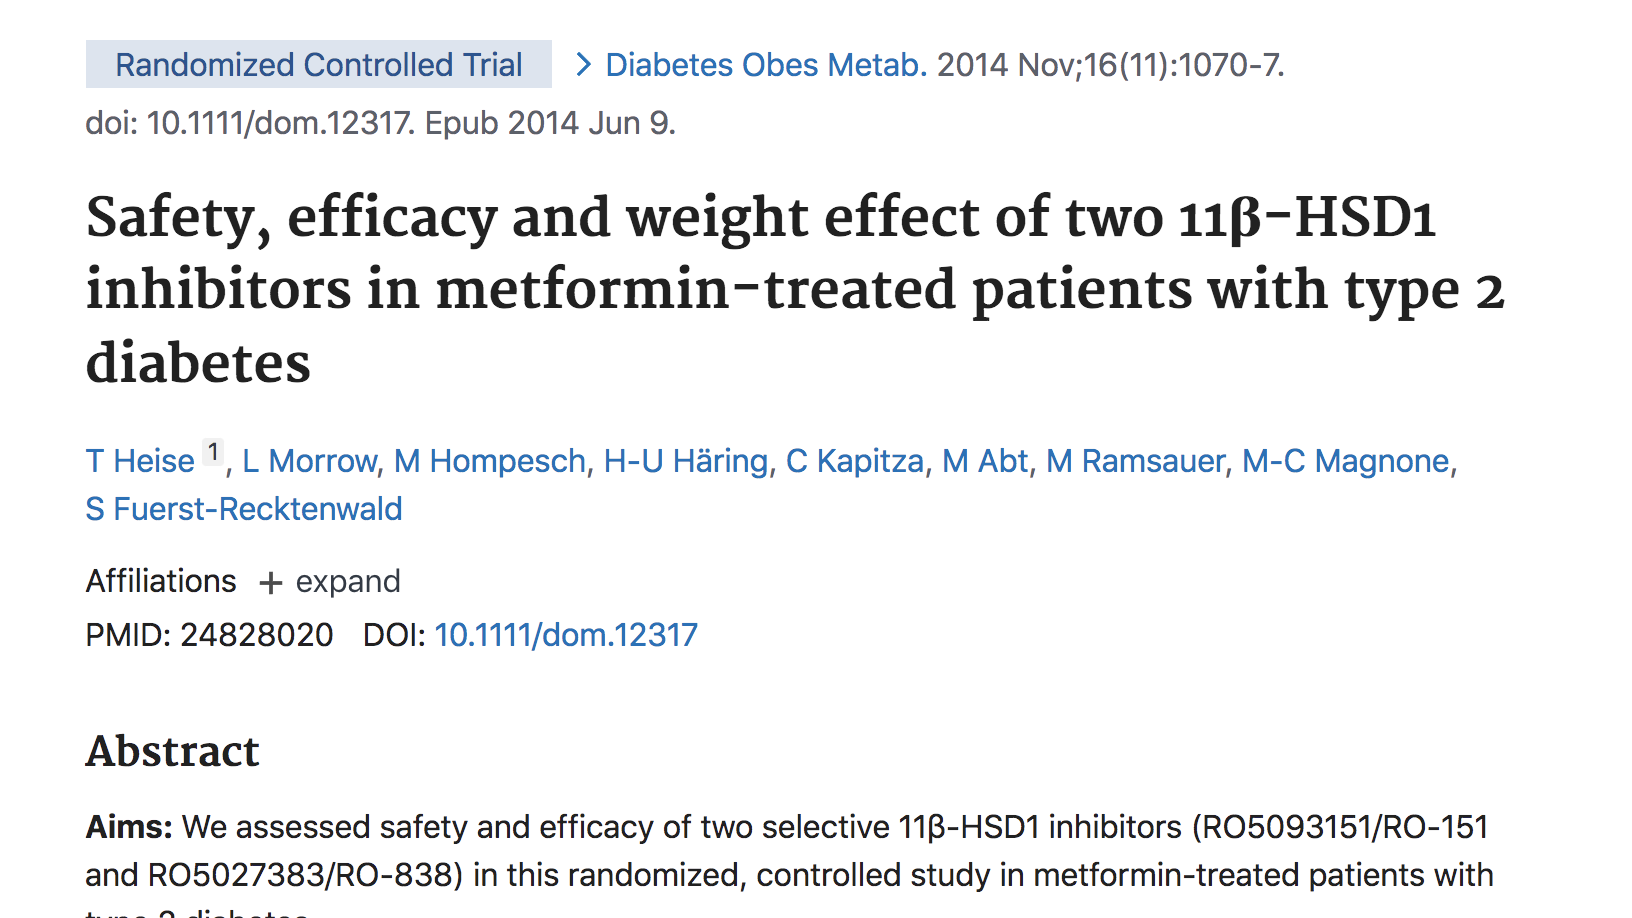 image of Safety, efficacy and weight effect of two 11β-HSD1 inhibitors in metformin-treated patients with type 2 diabetes.